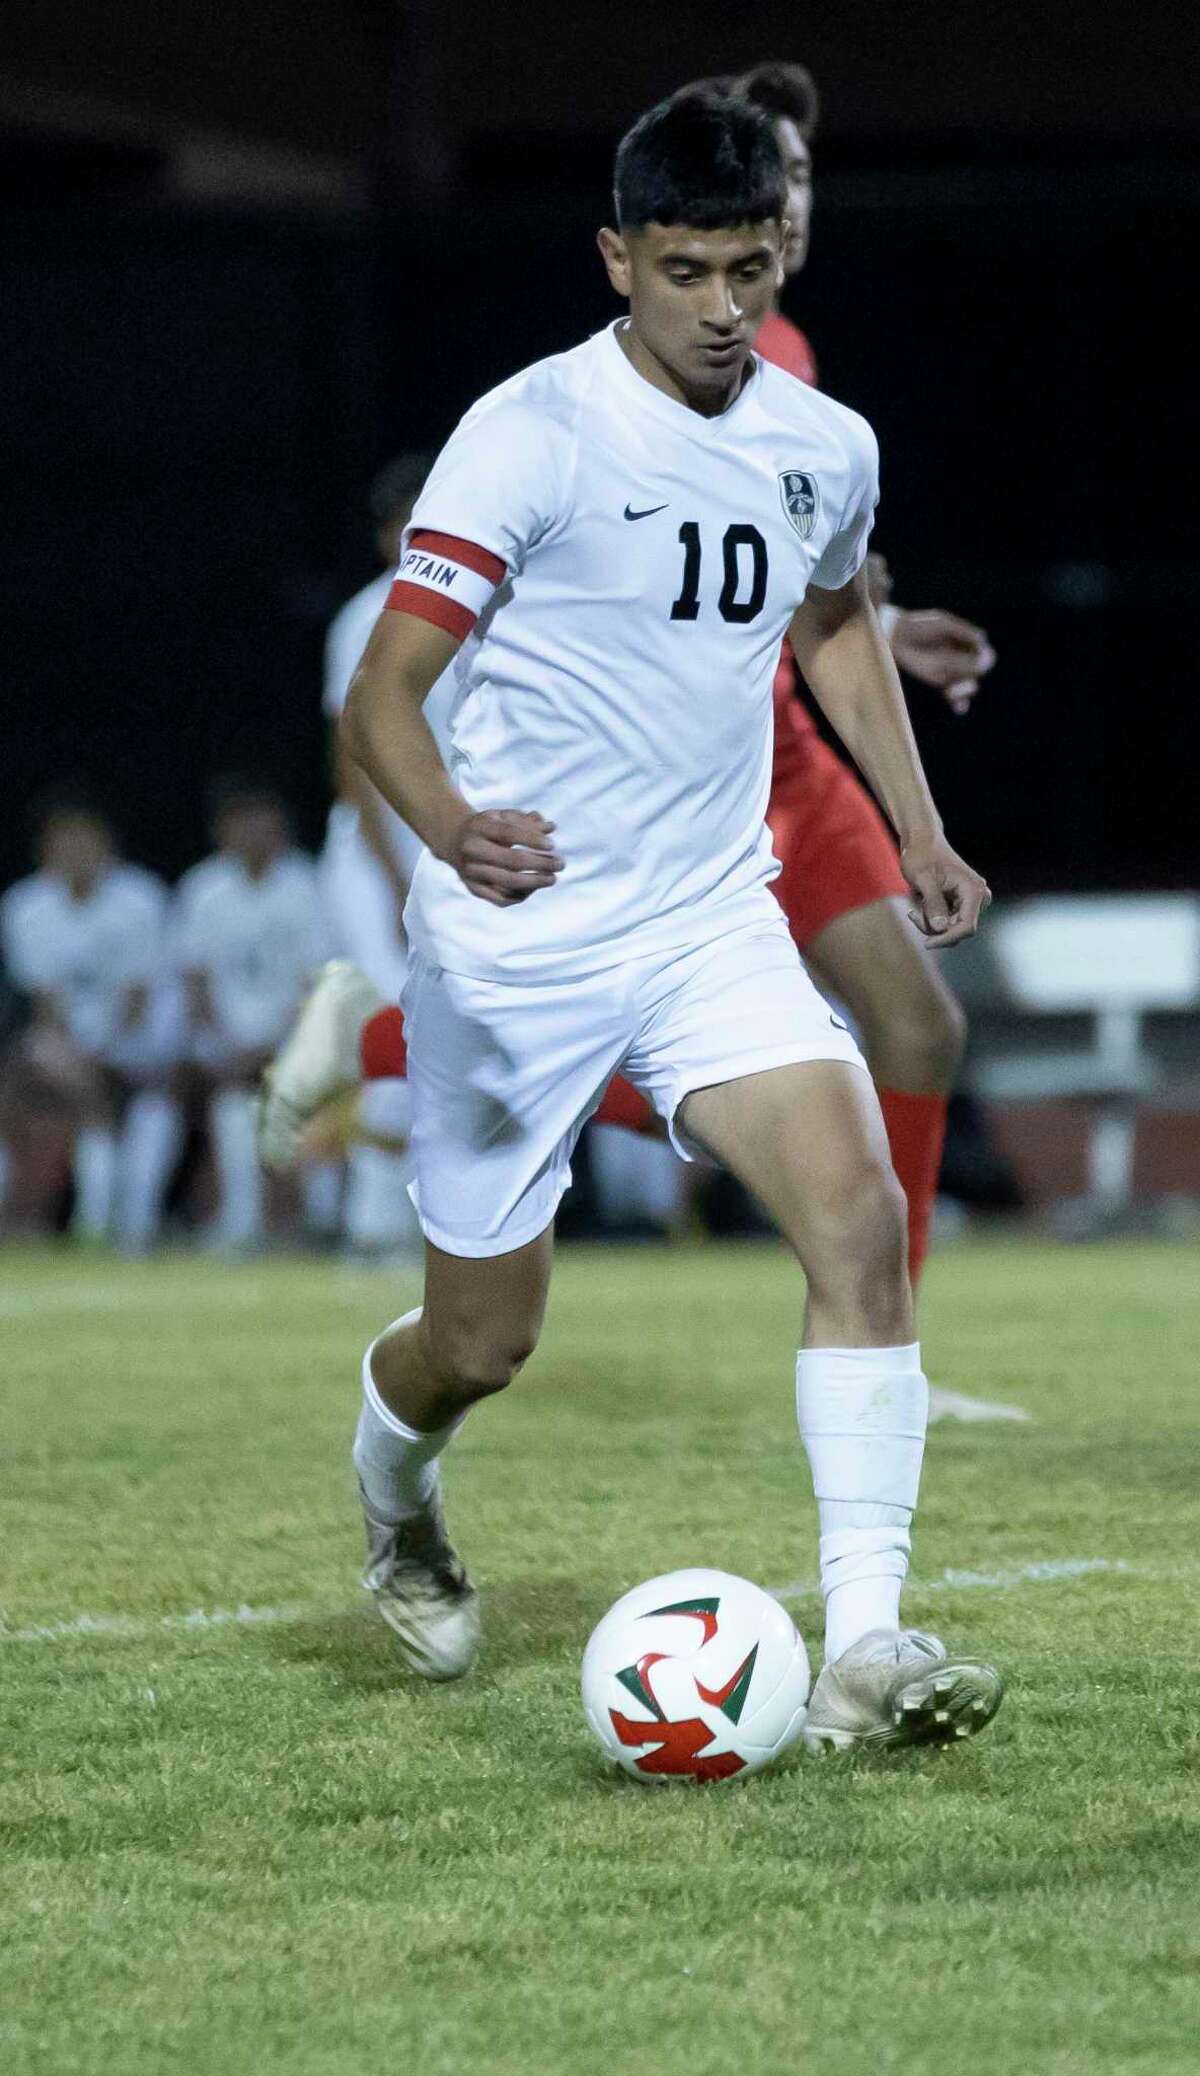 Conroe Daniel Ruiz (10) drives te ball during the first half of a District 13-6A boys soccer against The Woodlands at The Woodlands High School, Tuesday, Feb. 23, 2021, in The Woodlands.